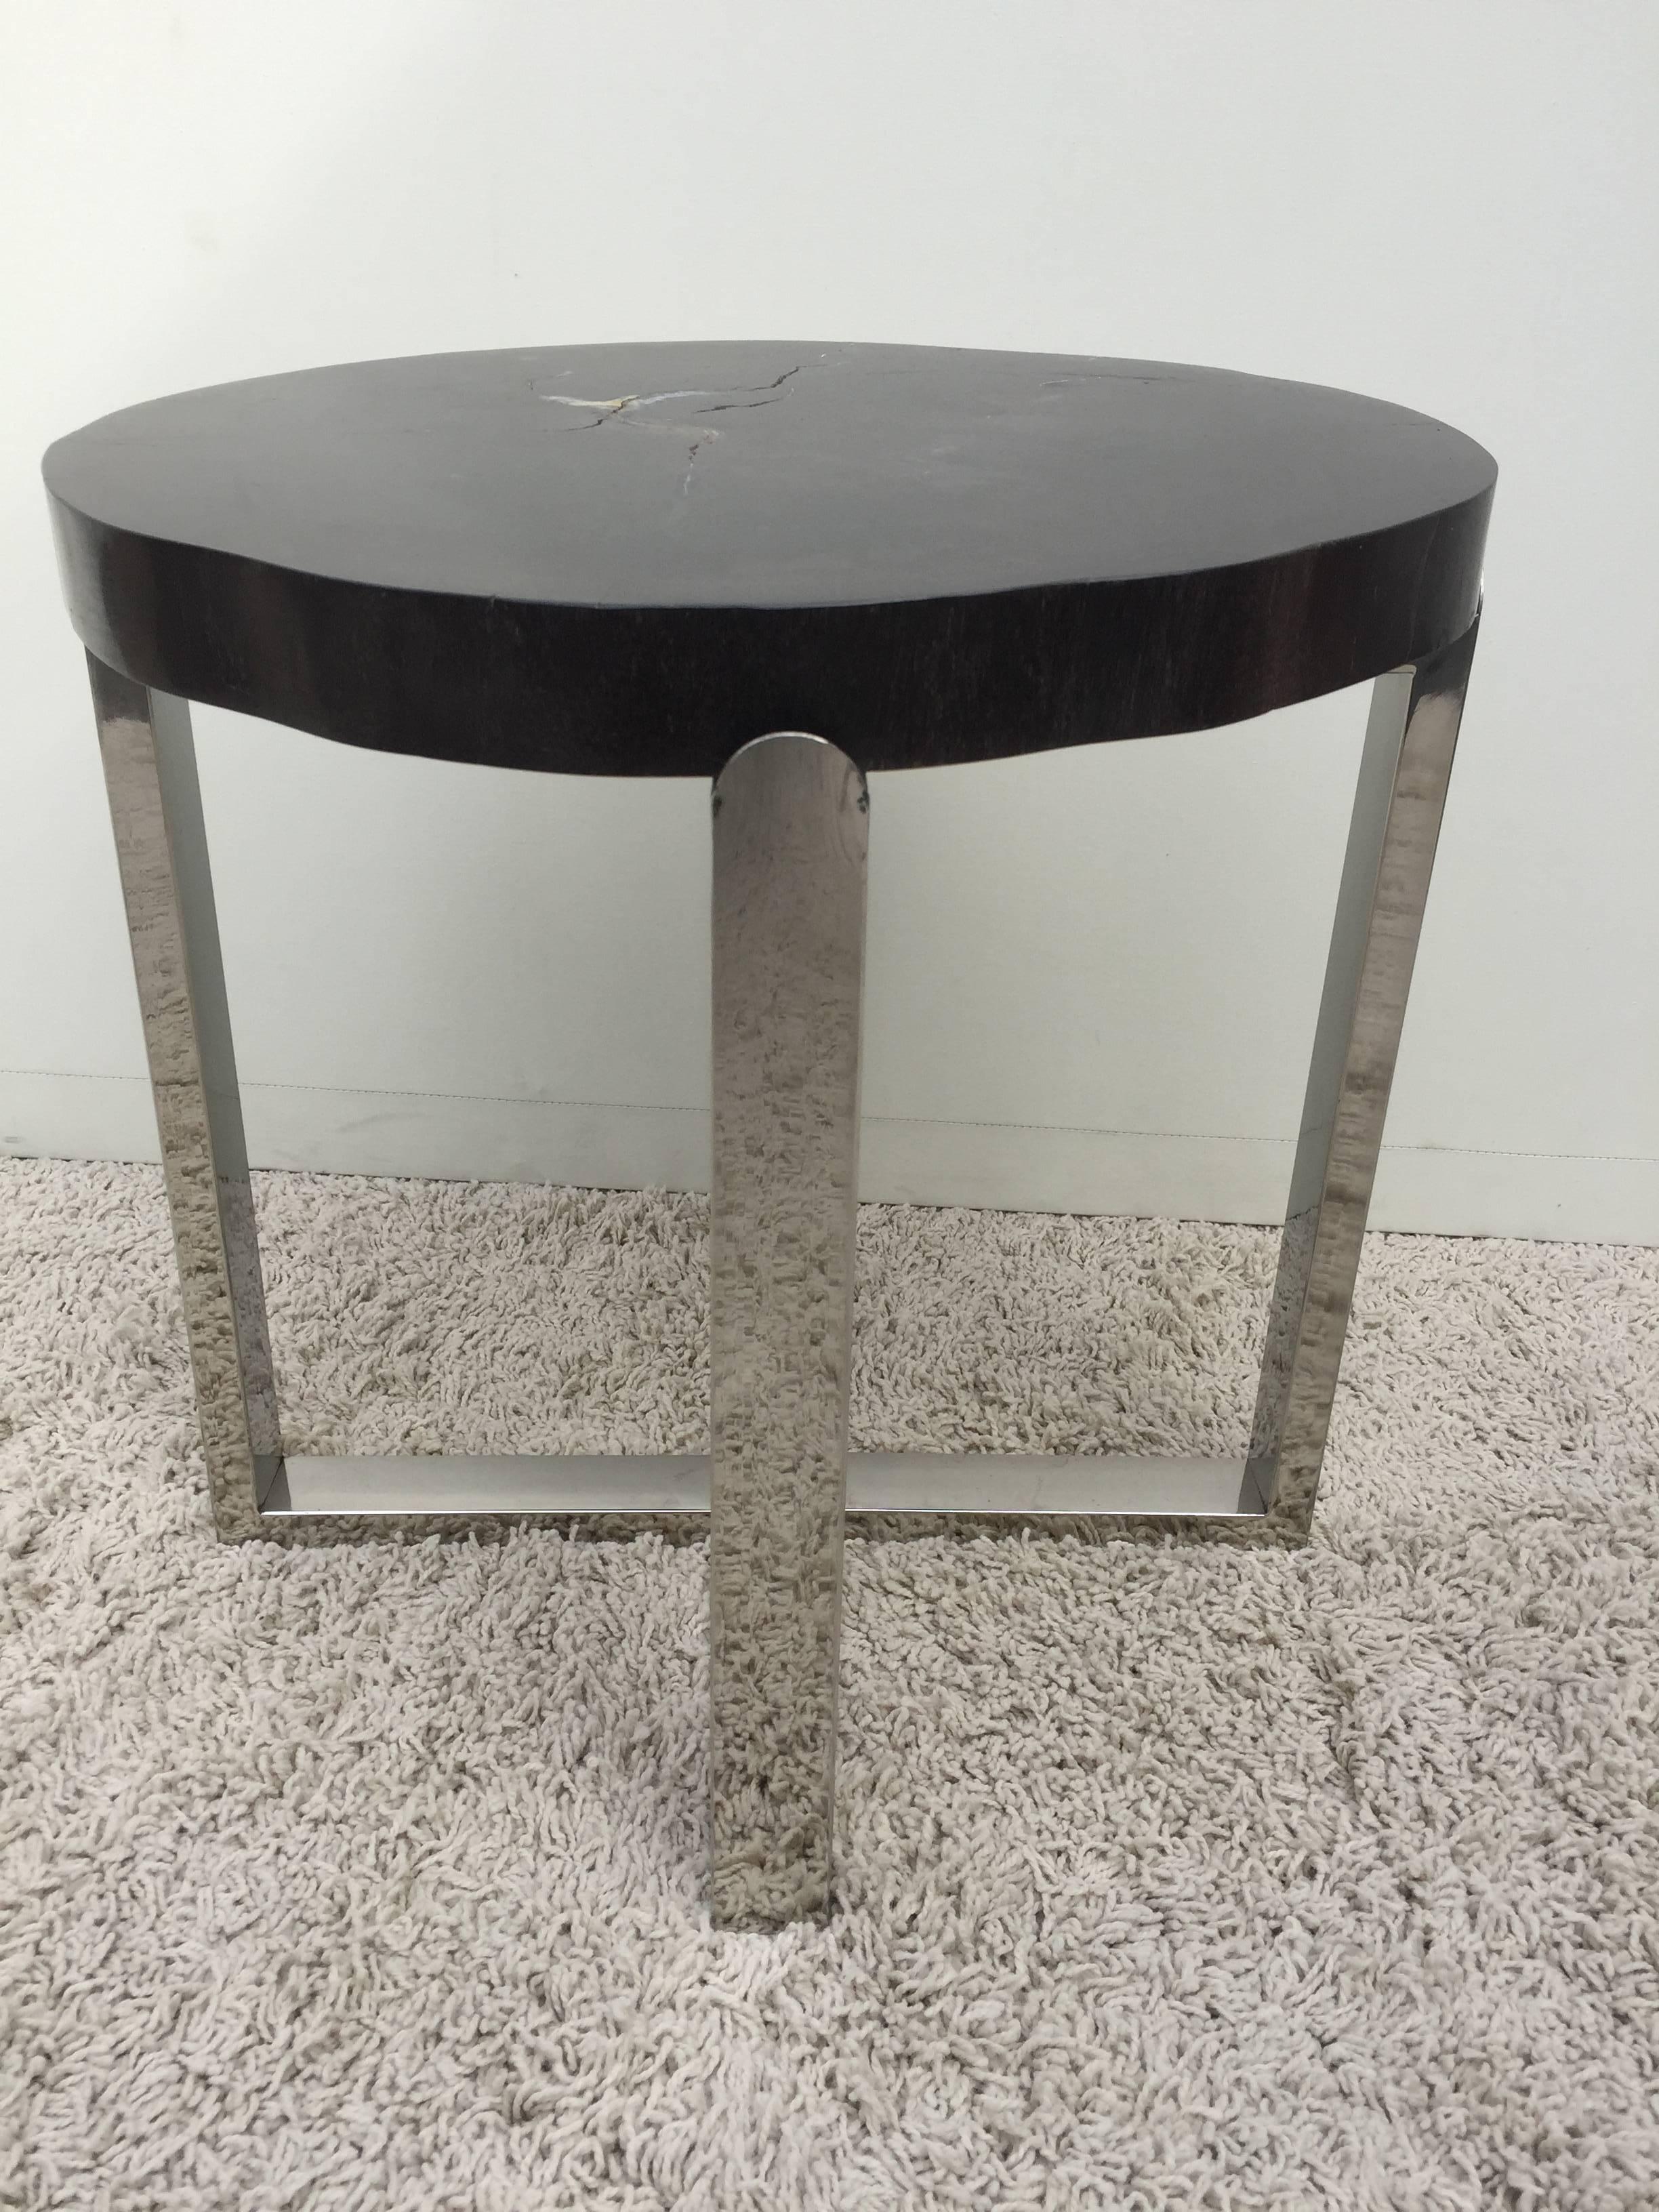 Pair of petrified wood black and crème vein, polished handmade chrome base, petite side tables. Unique one of a kind. With criss-cross continuous base.